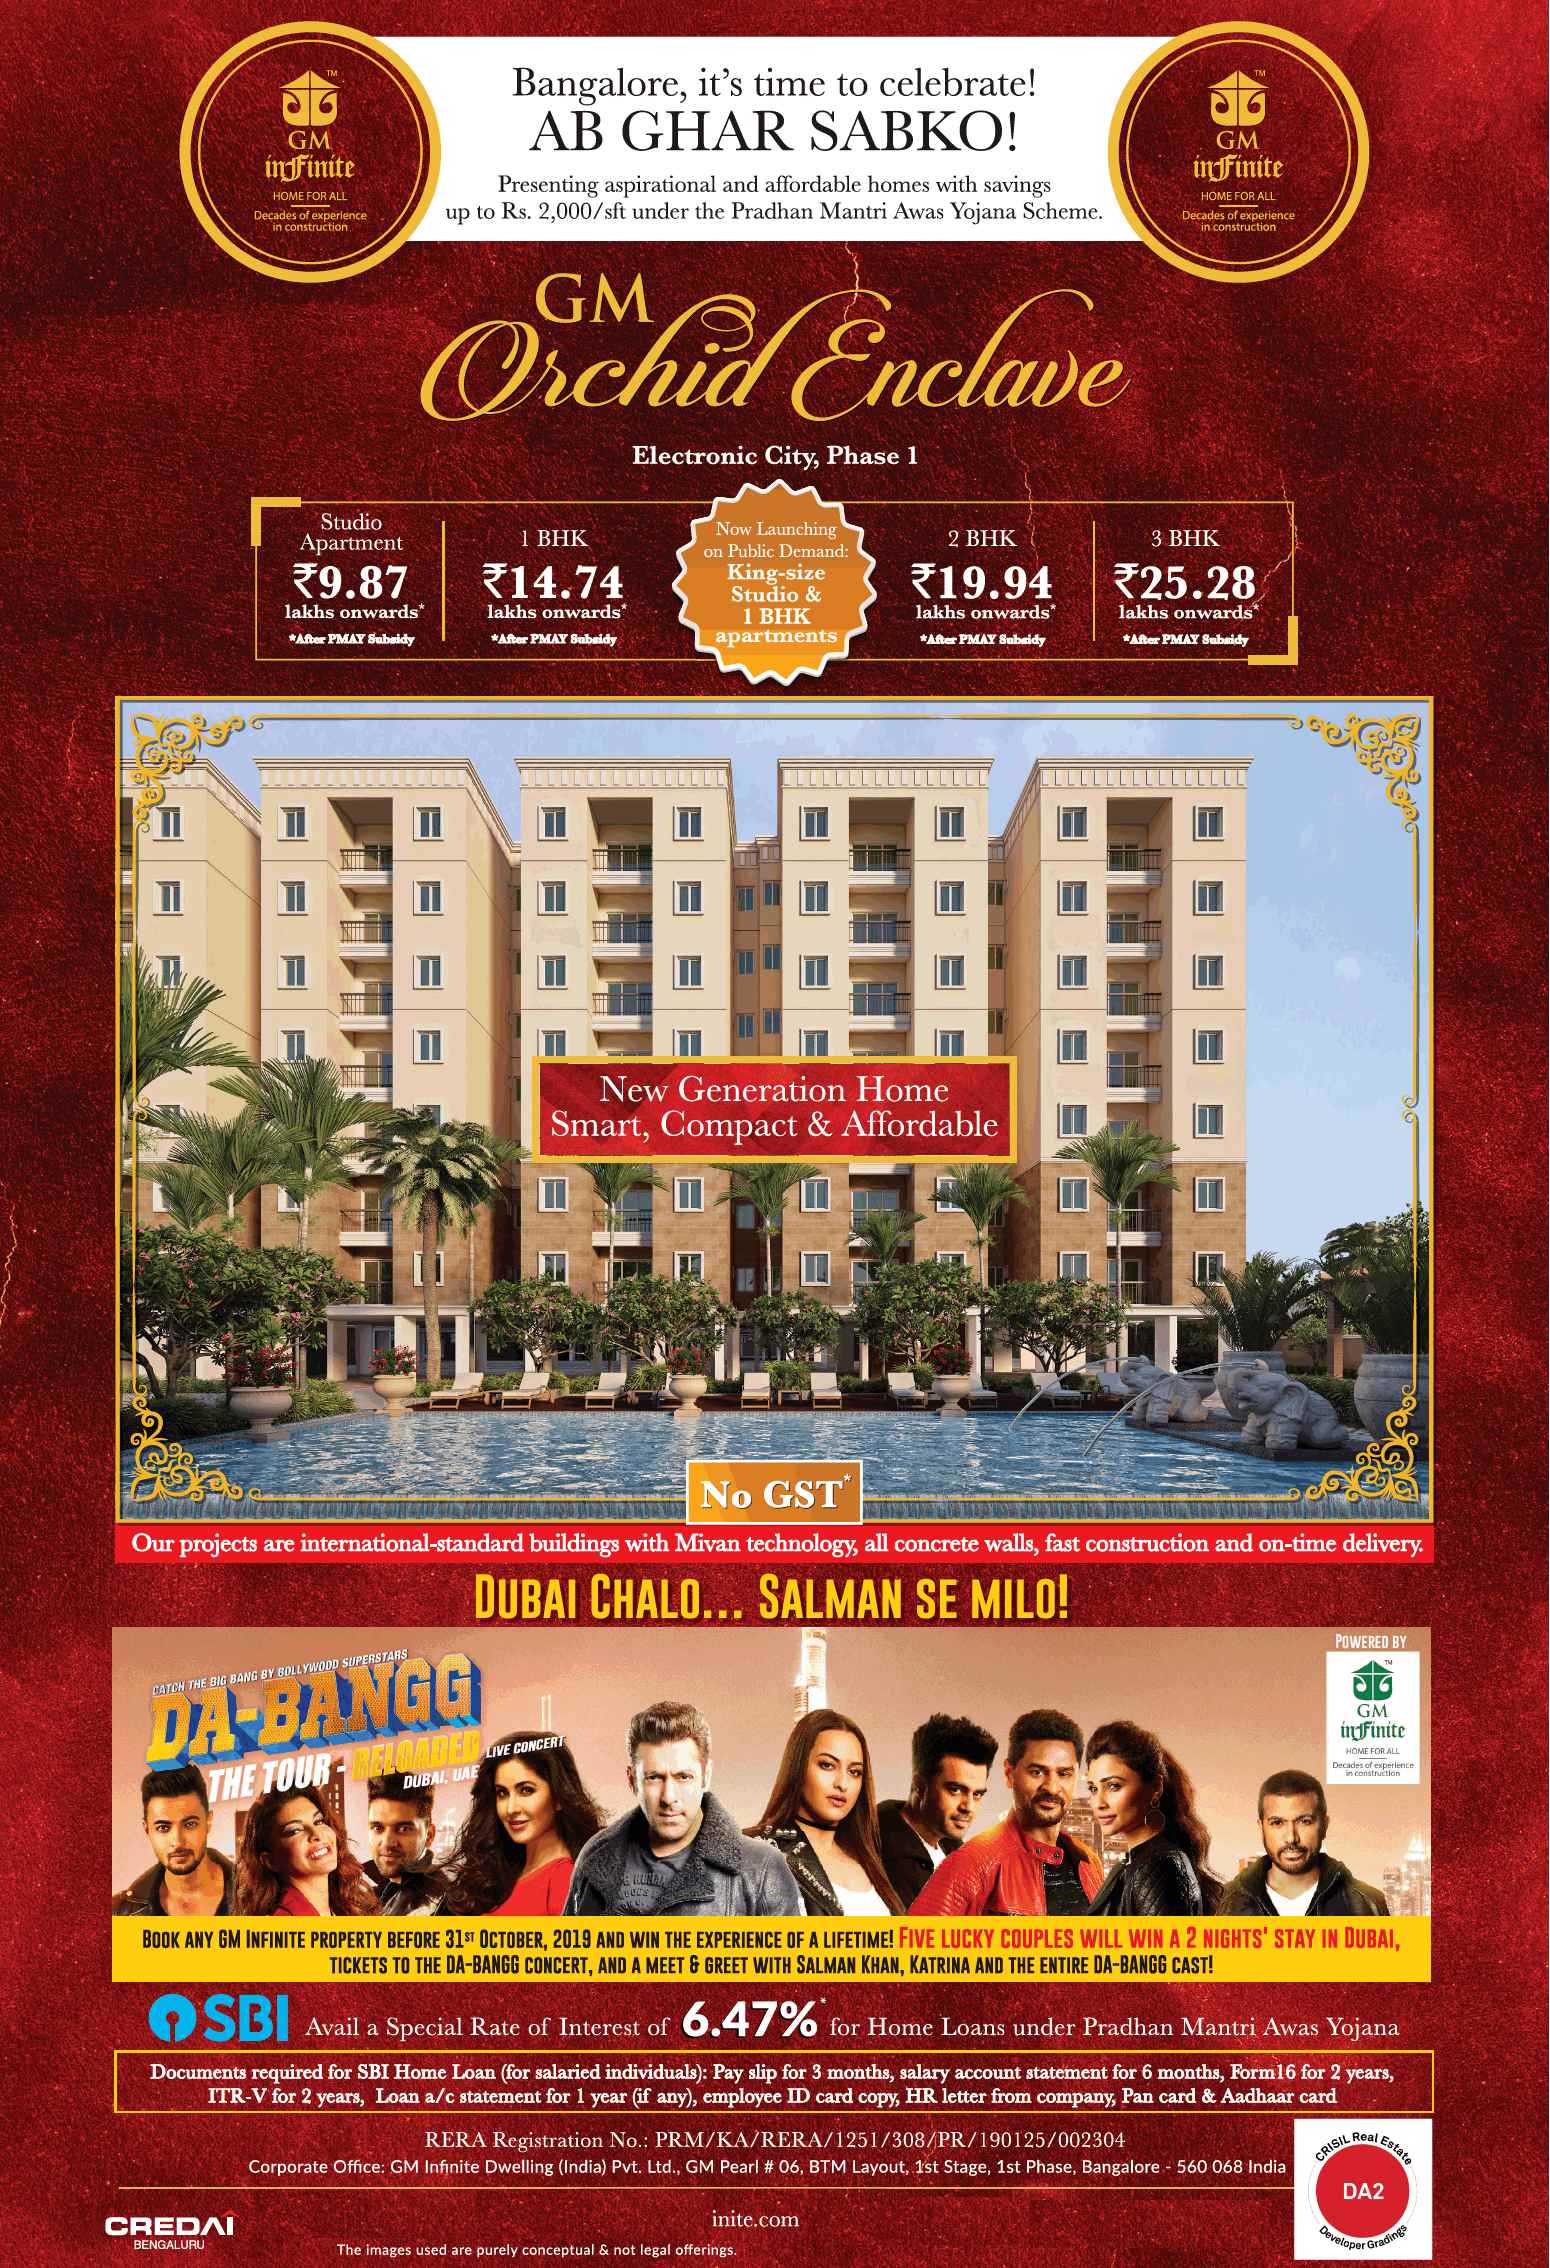 Now launching King-size studio & 1 BHK apartments  at GM Orchid Enclave, Bangalore